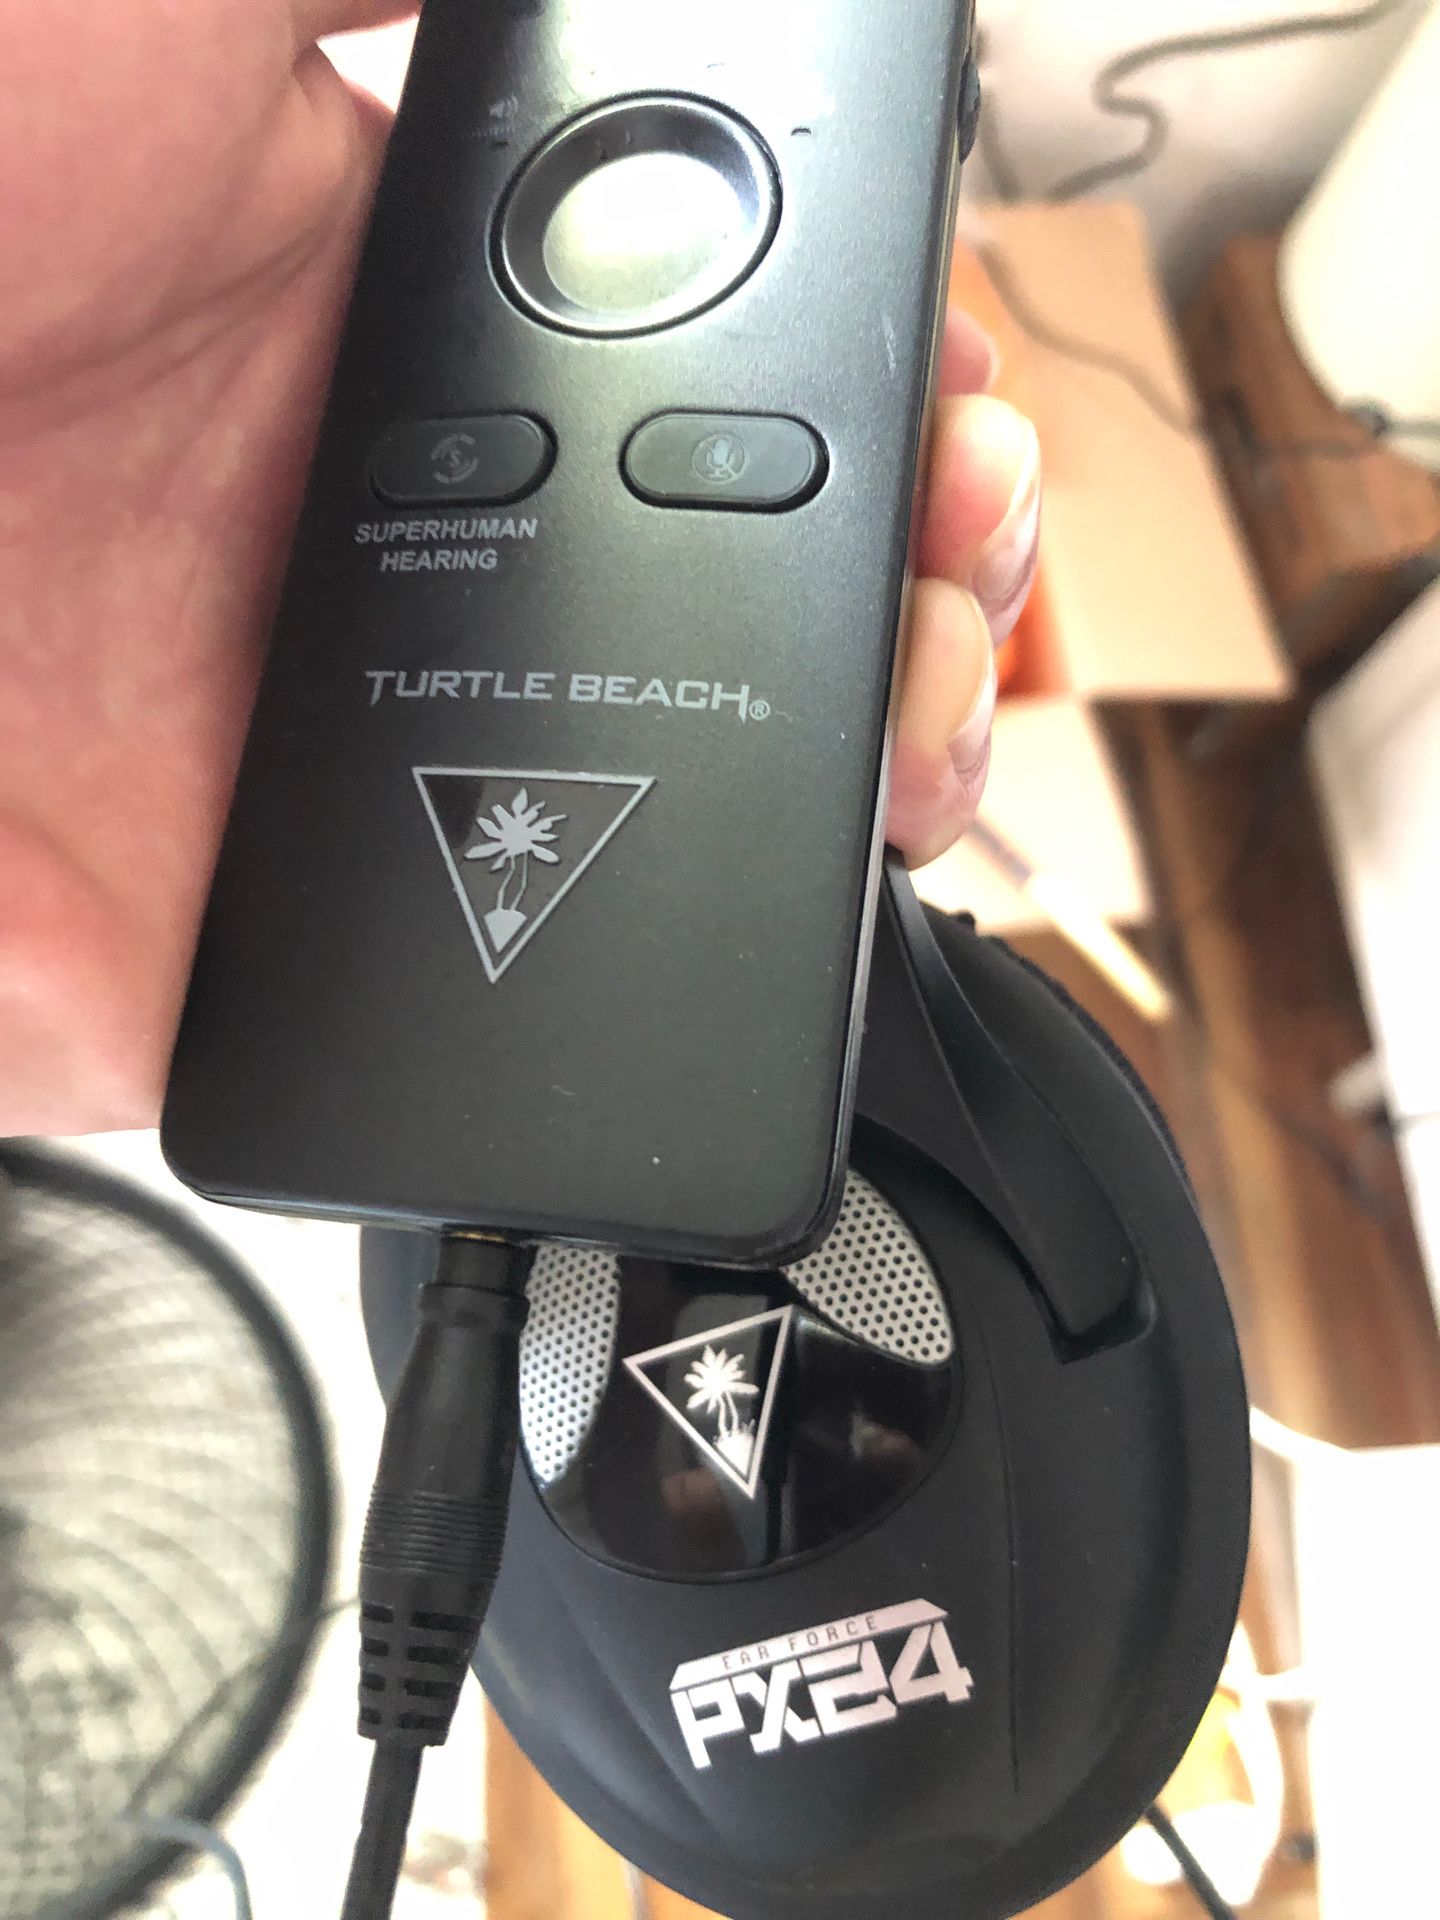 Turtle Beach Px24 gaming headset